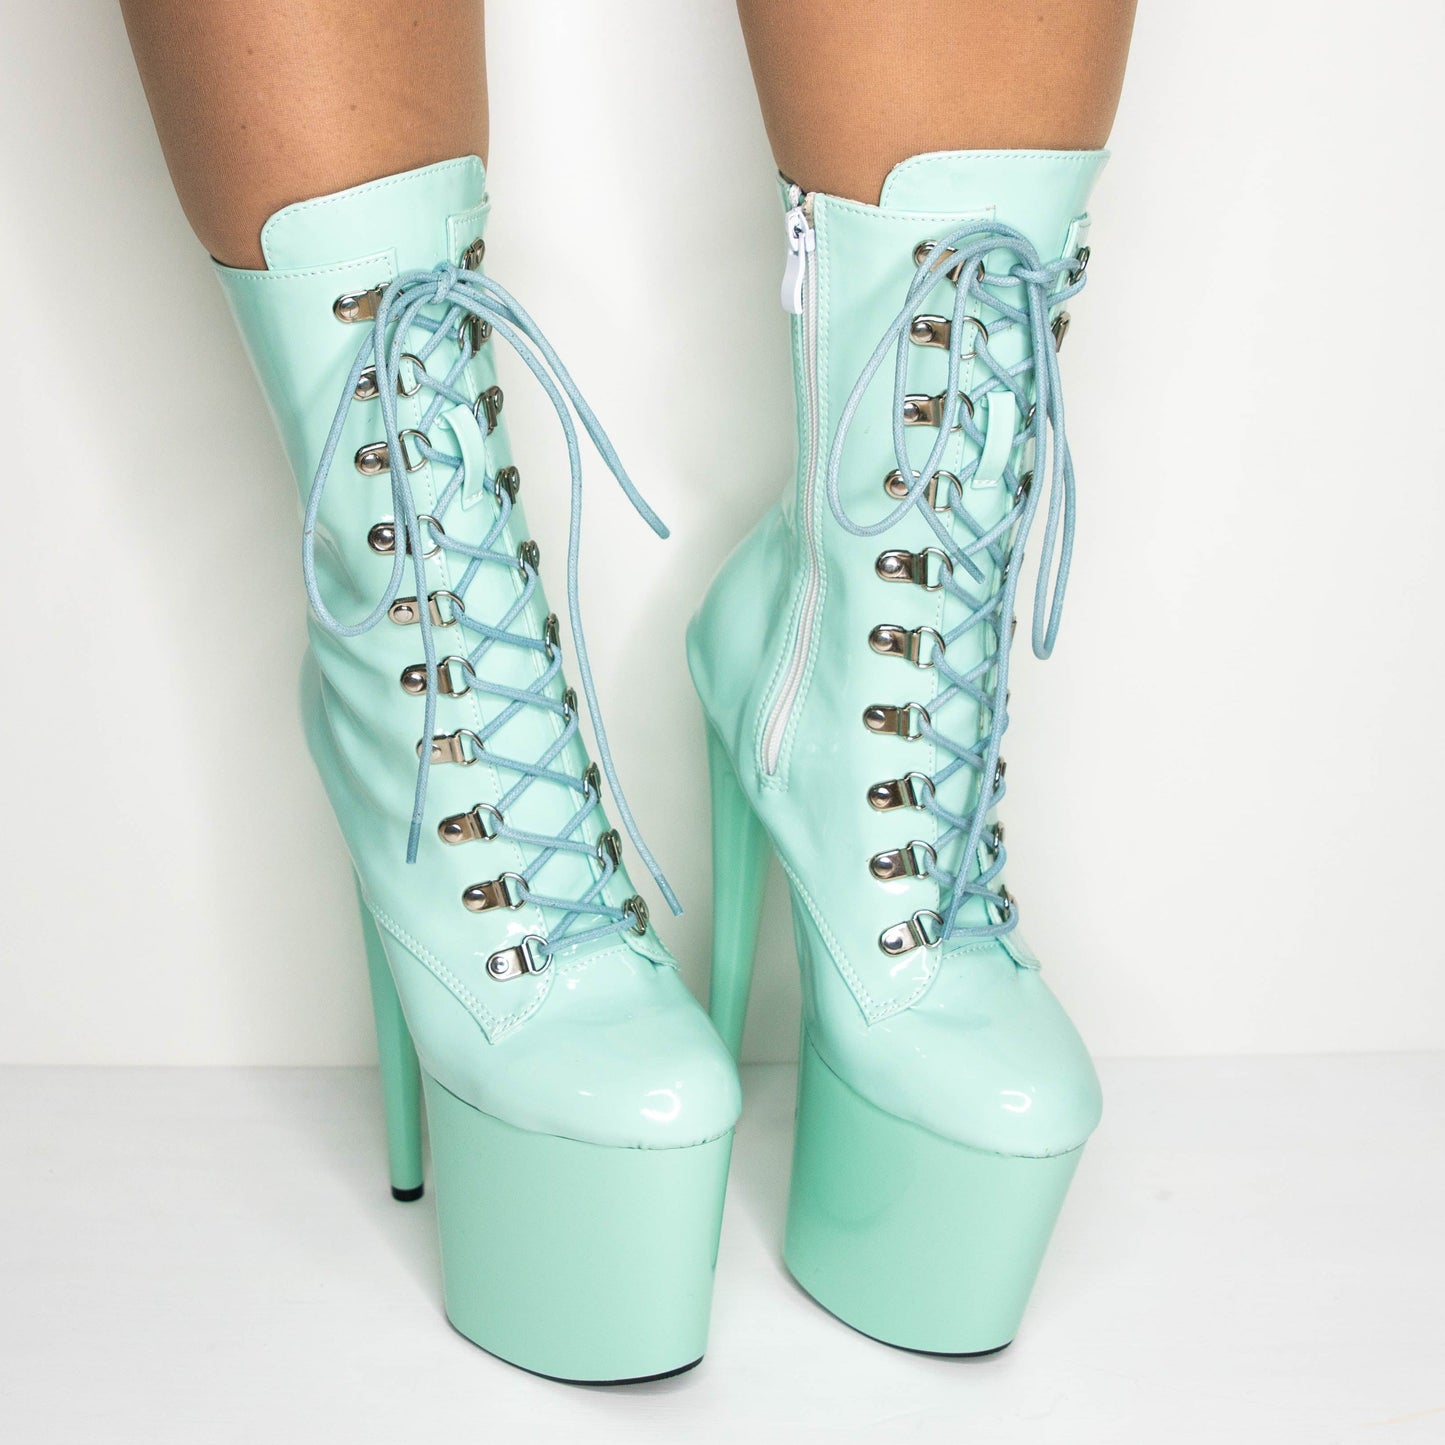 size 5 and 6 only Spearmint 8" boot - Sky High Heels Australia